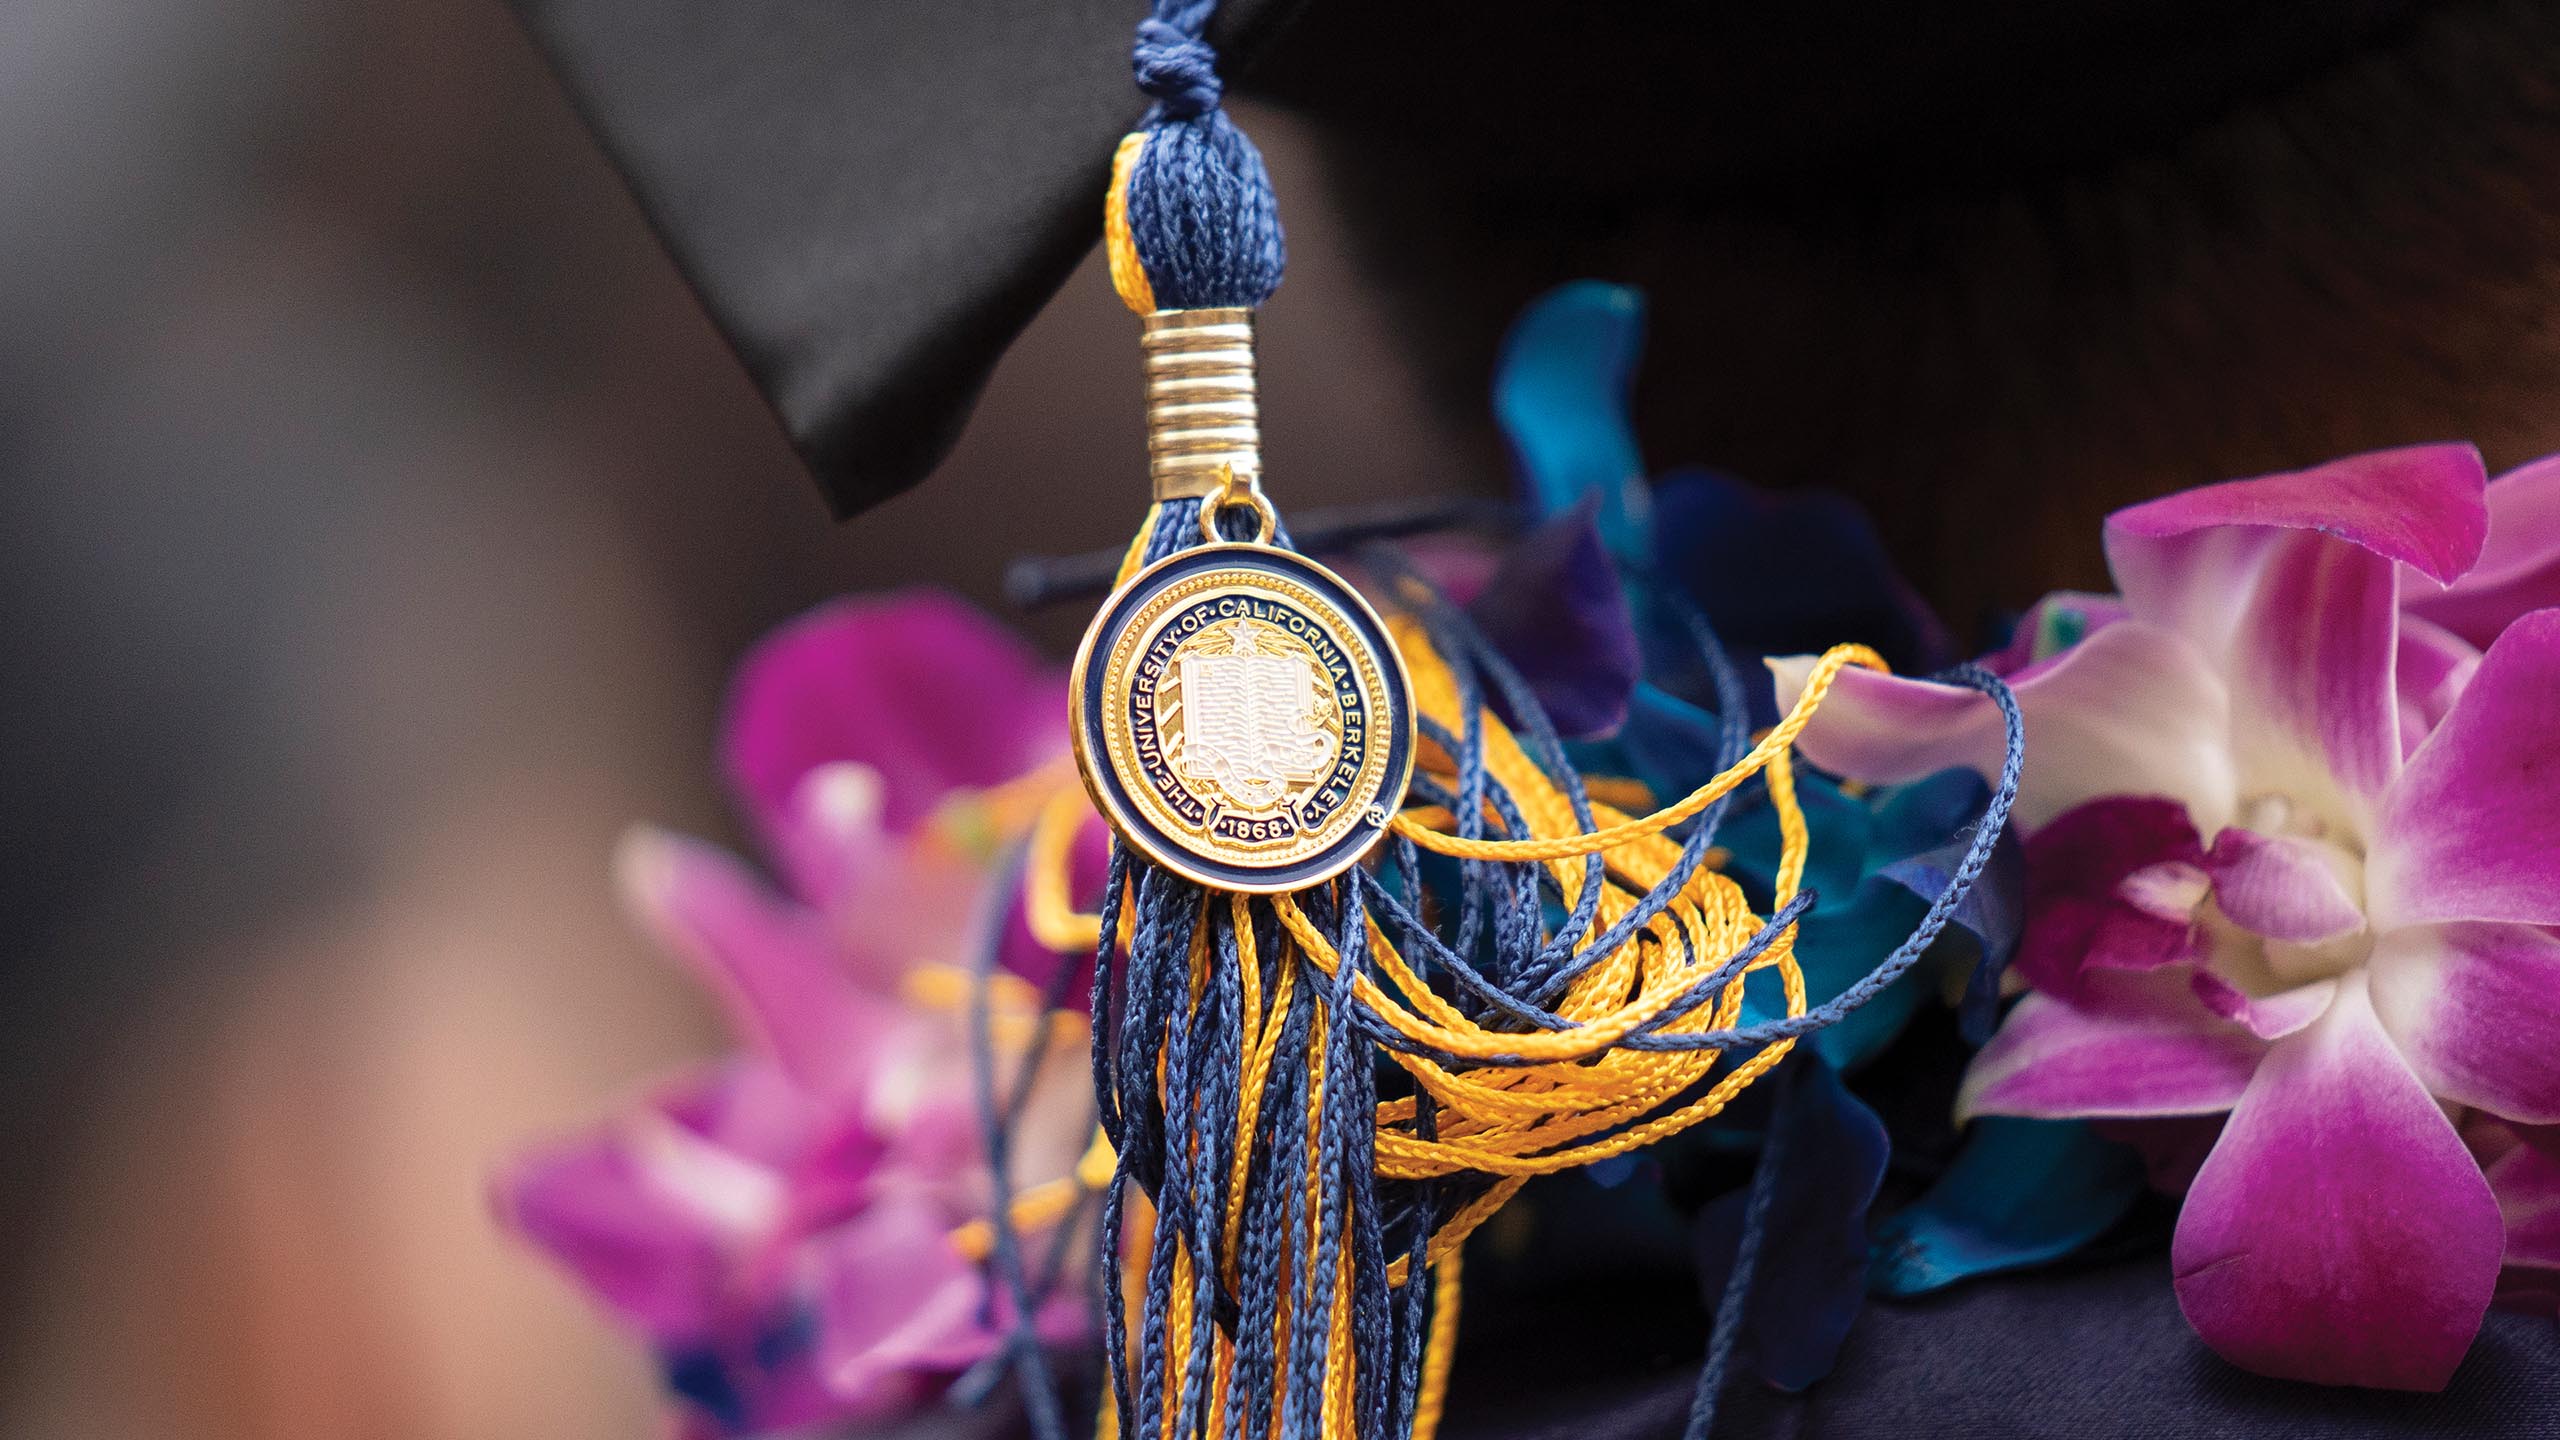 Class of 2024 Engineering Commencement info